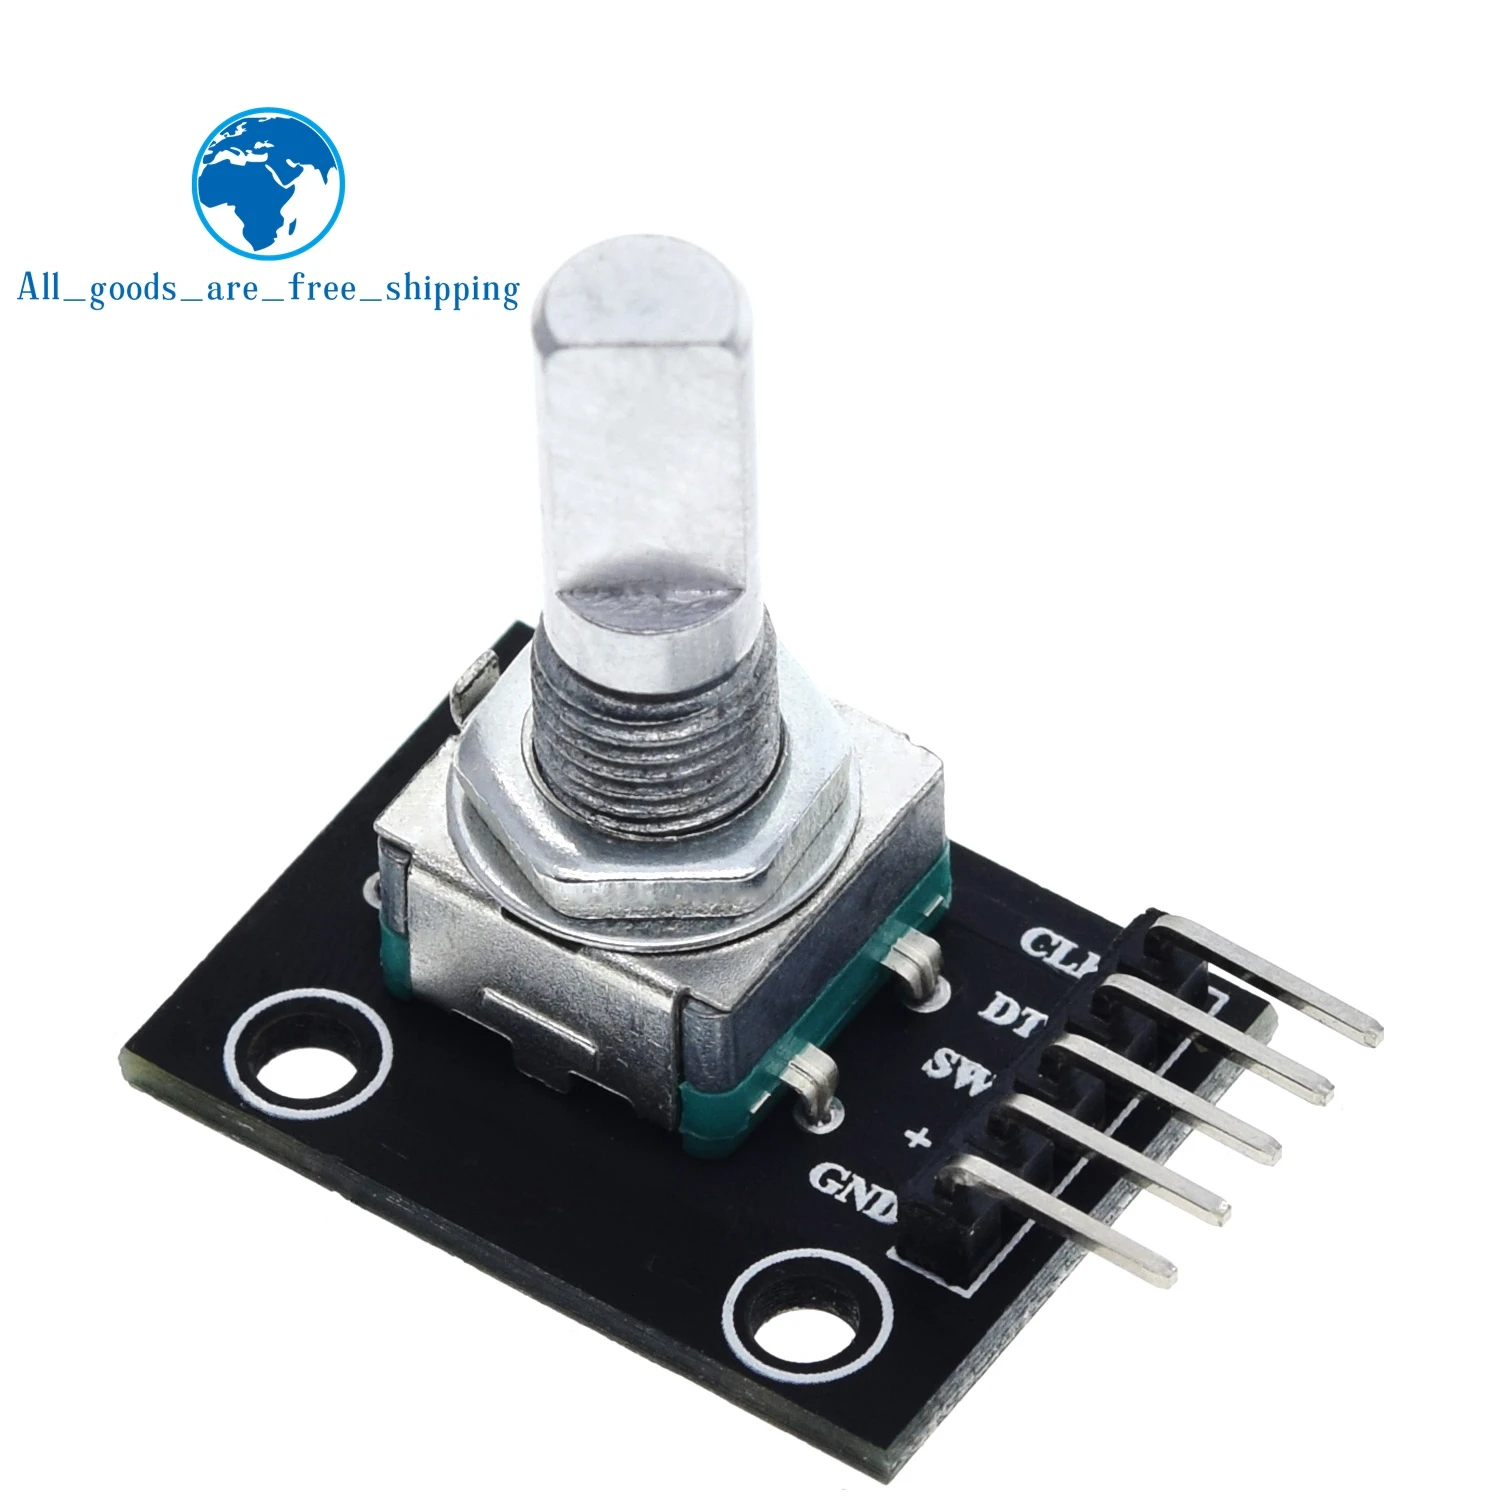 TZT 360 Degrees Rotary Encoder Module For Arduino Brick Sensor Switch Development Board KY-040 With Pins